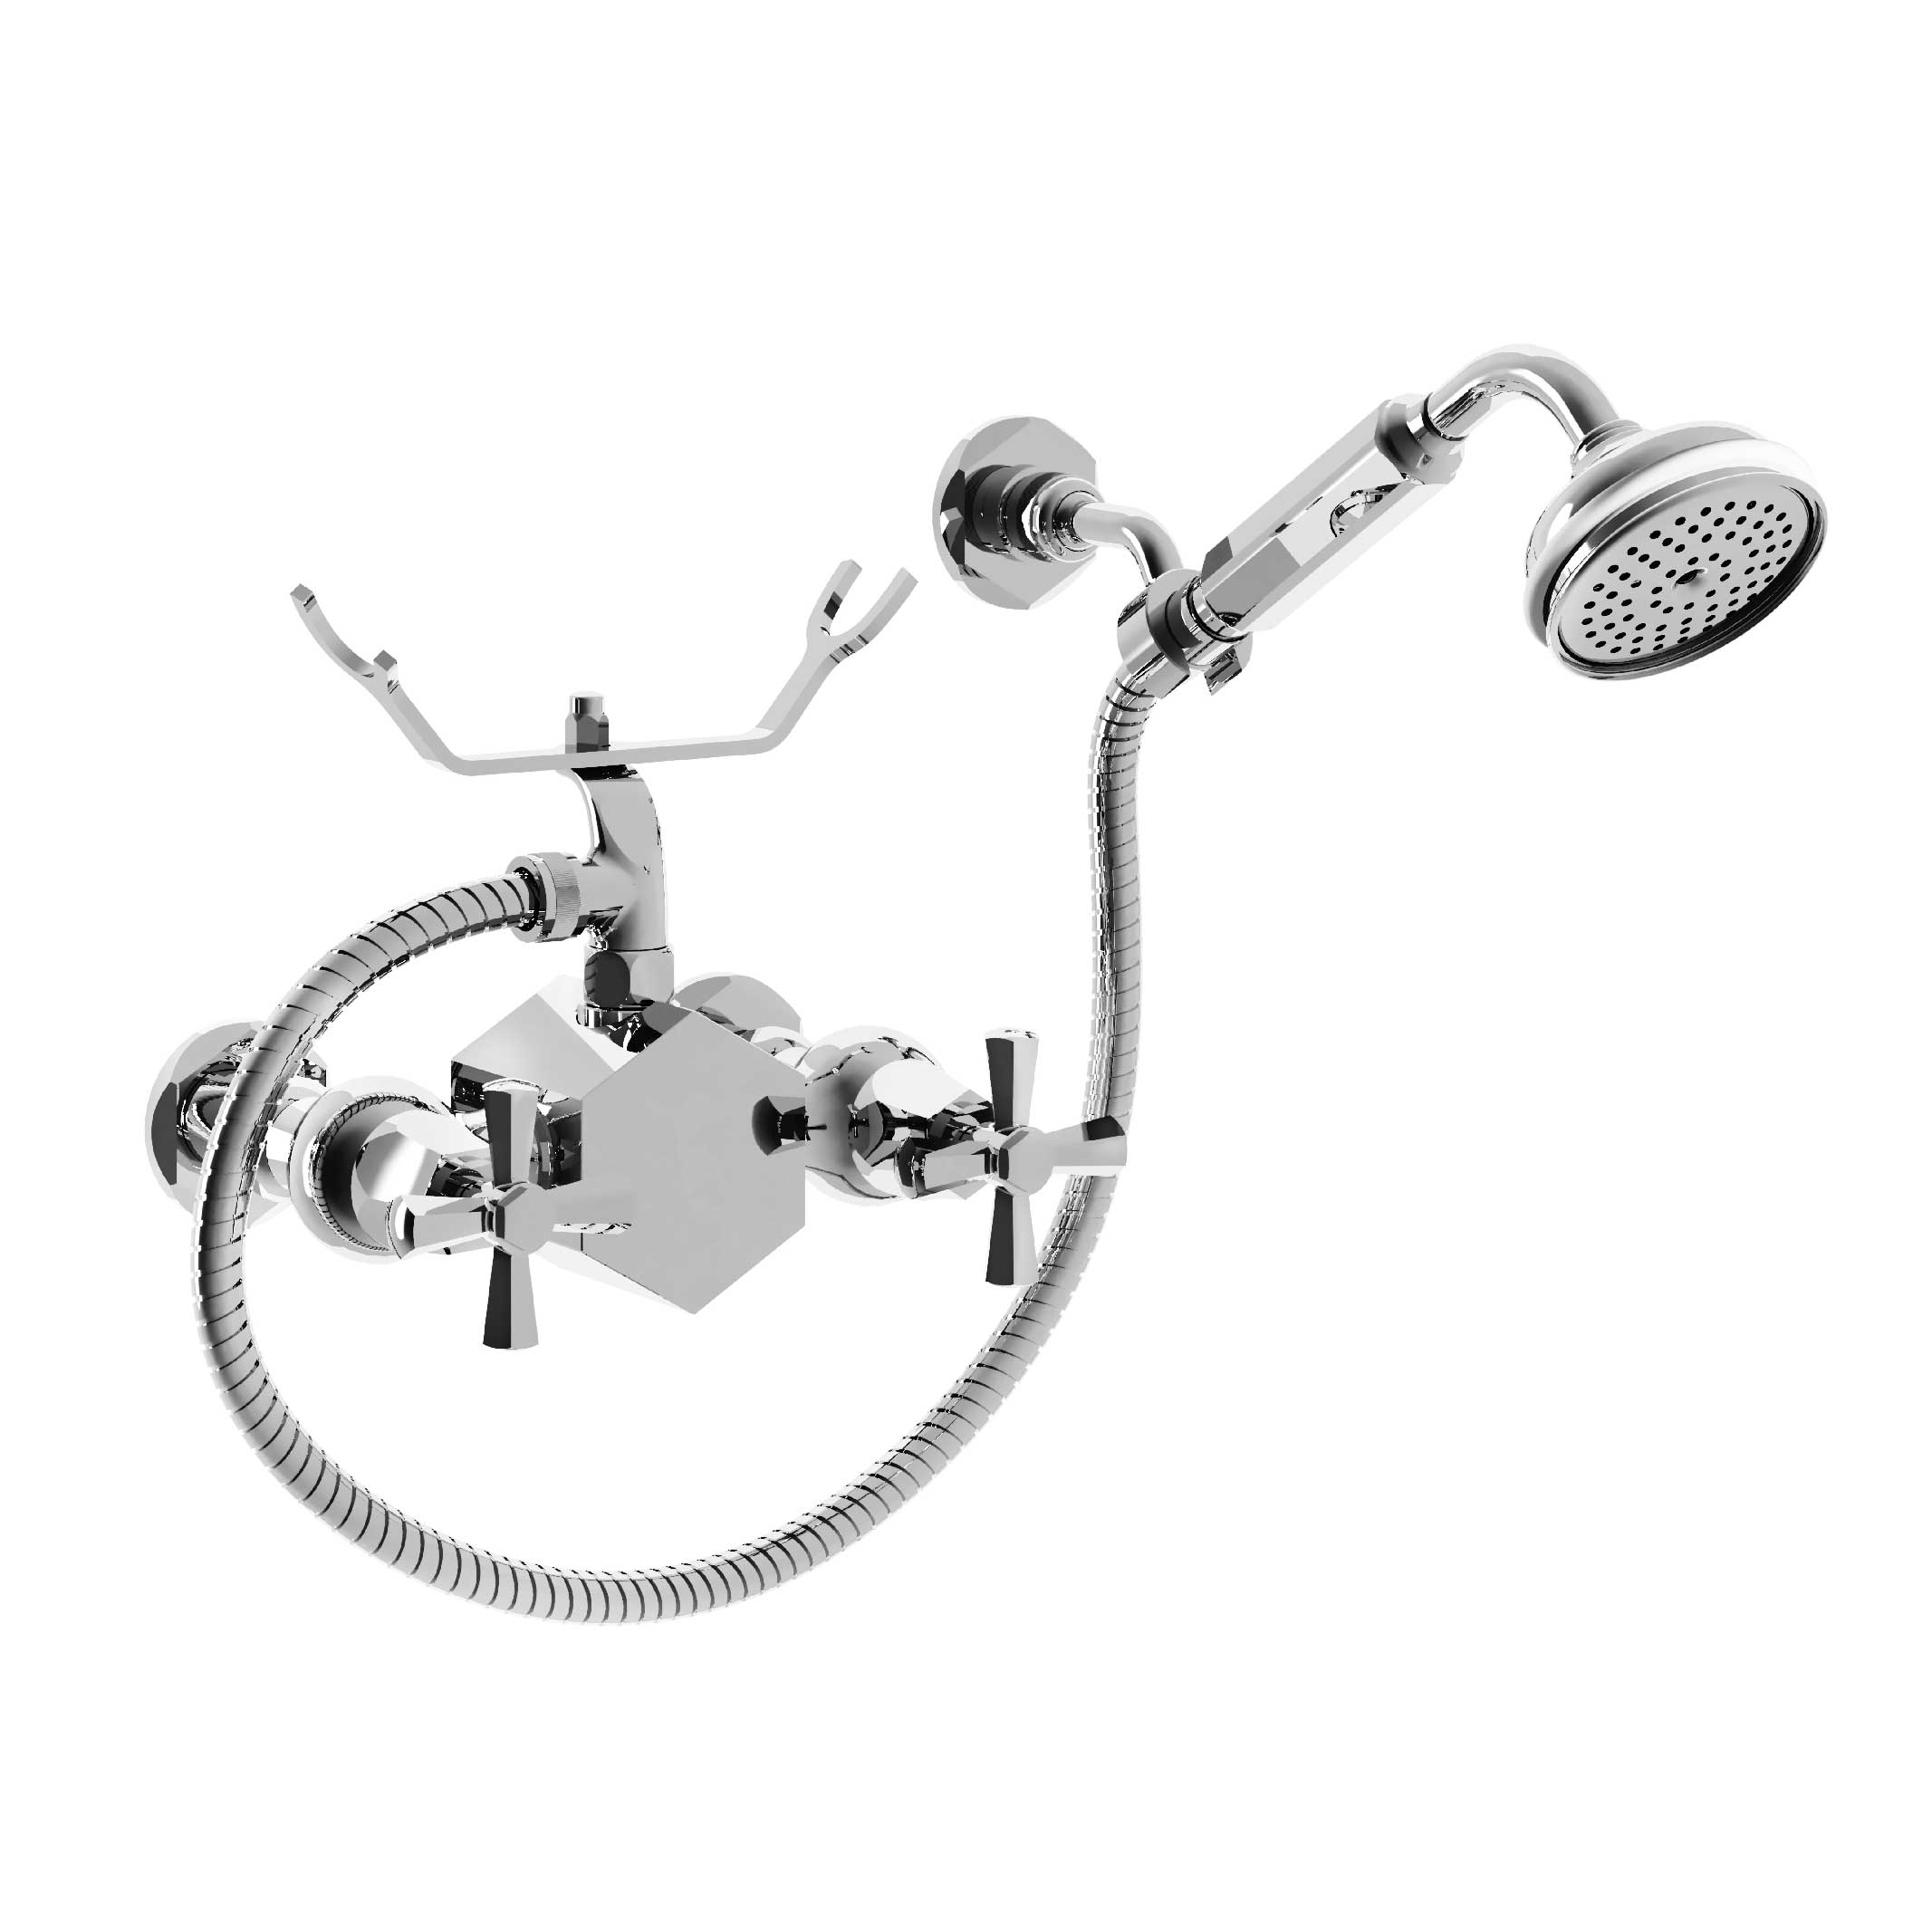 M13-2201 Shower mixer with hook